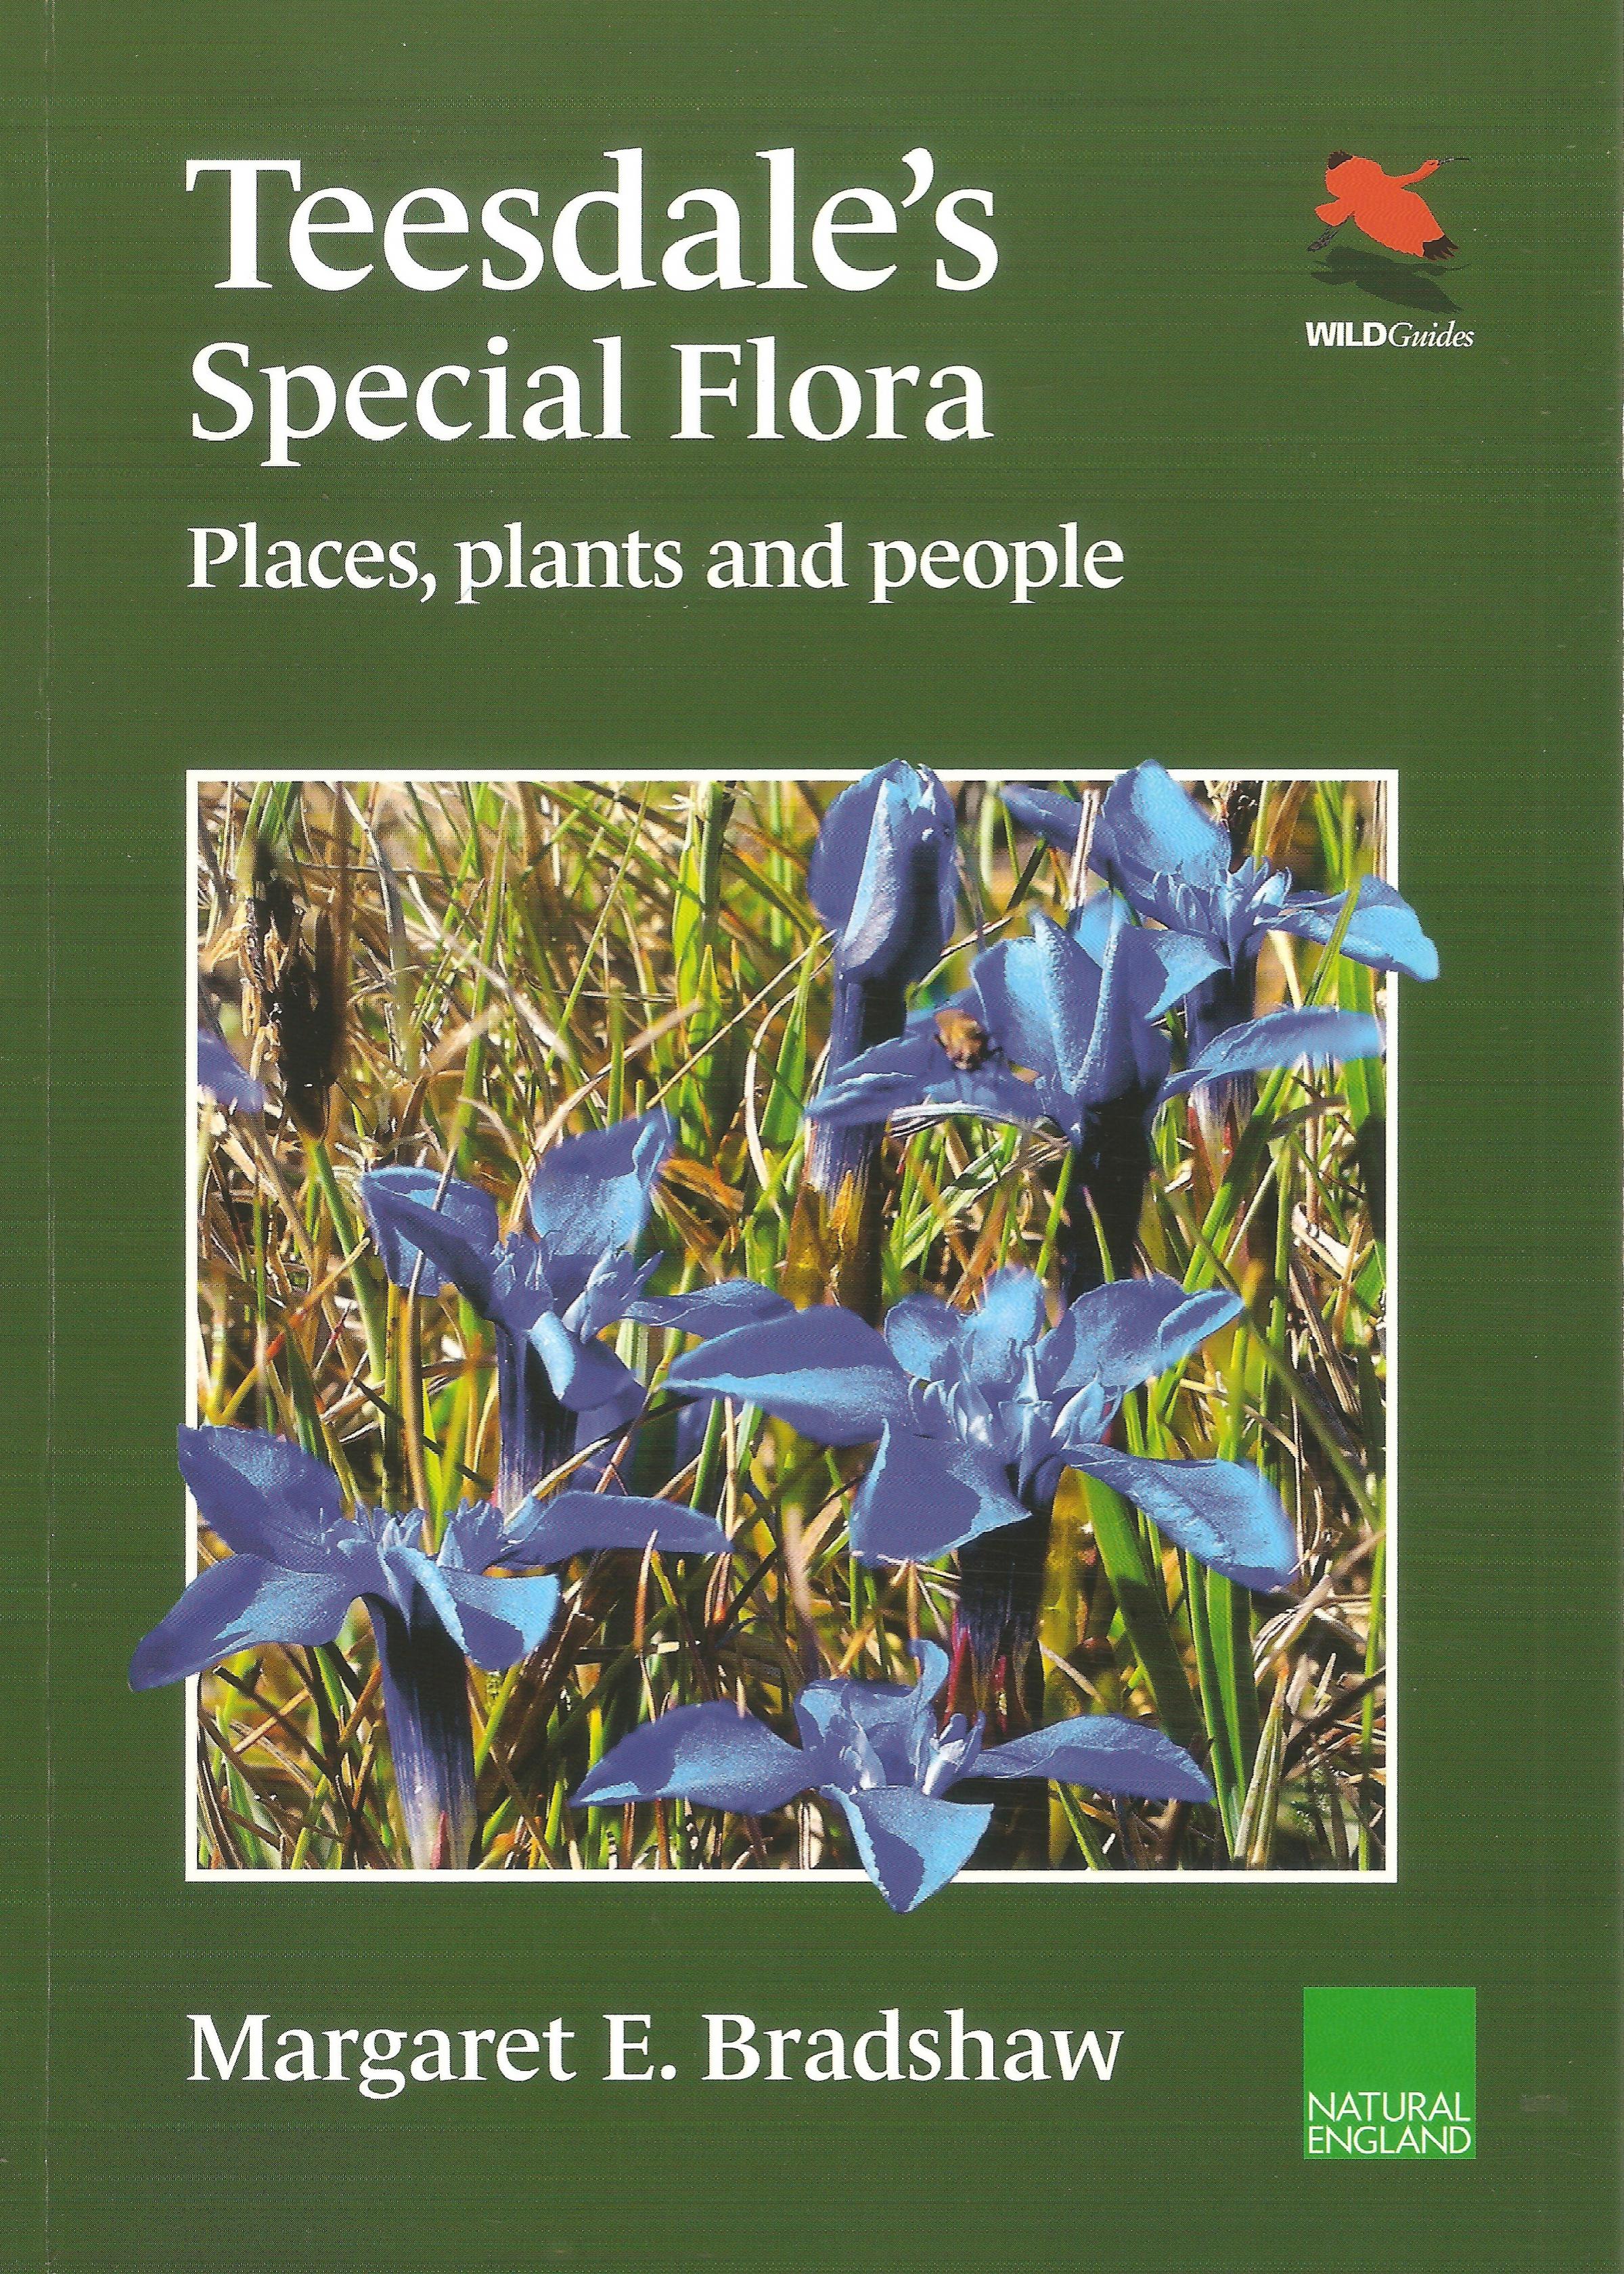 Teesdales Special Flora: Places, plants and people by Dr Margaret Bradshaw (Princeton University Press, £14.99)